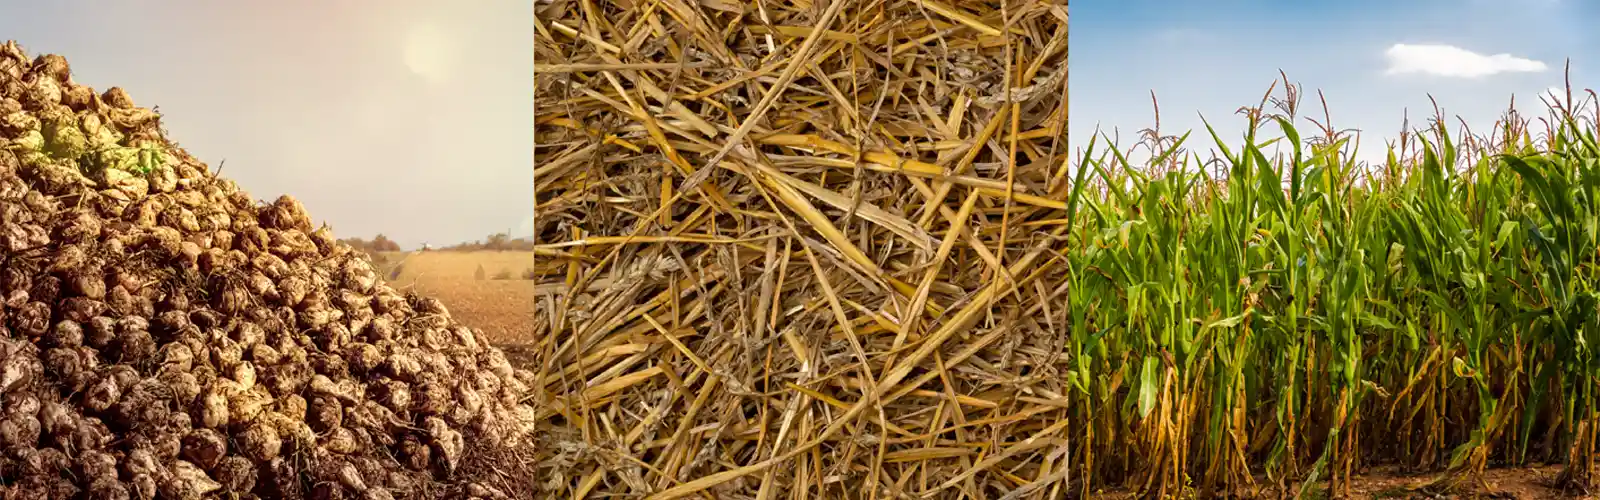 Business Potential for Agricultural Biomass: Tamil Nadu Perspective